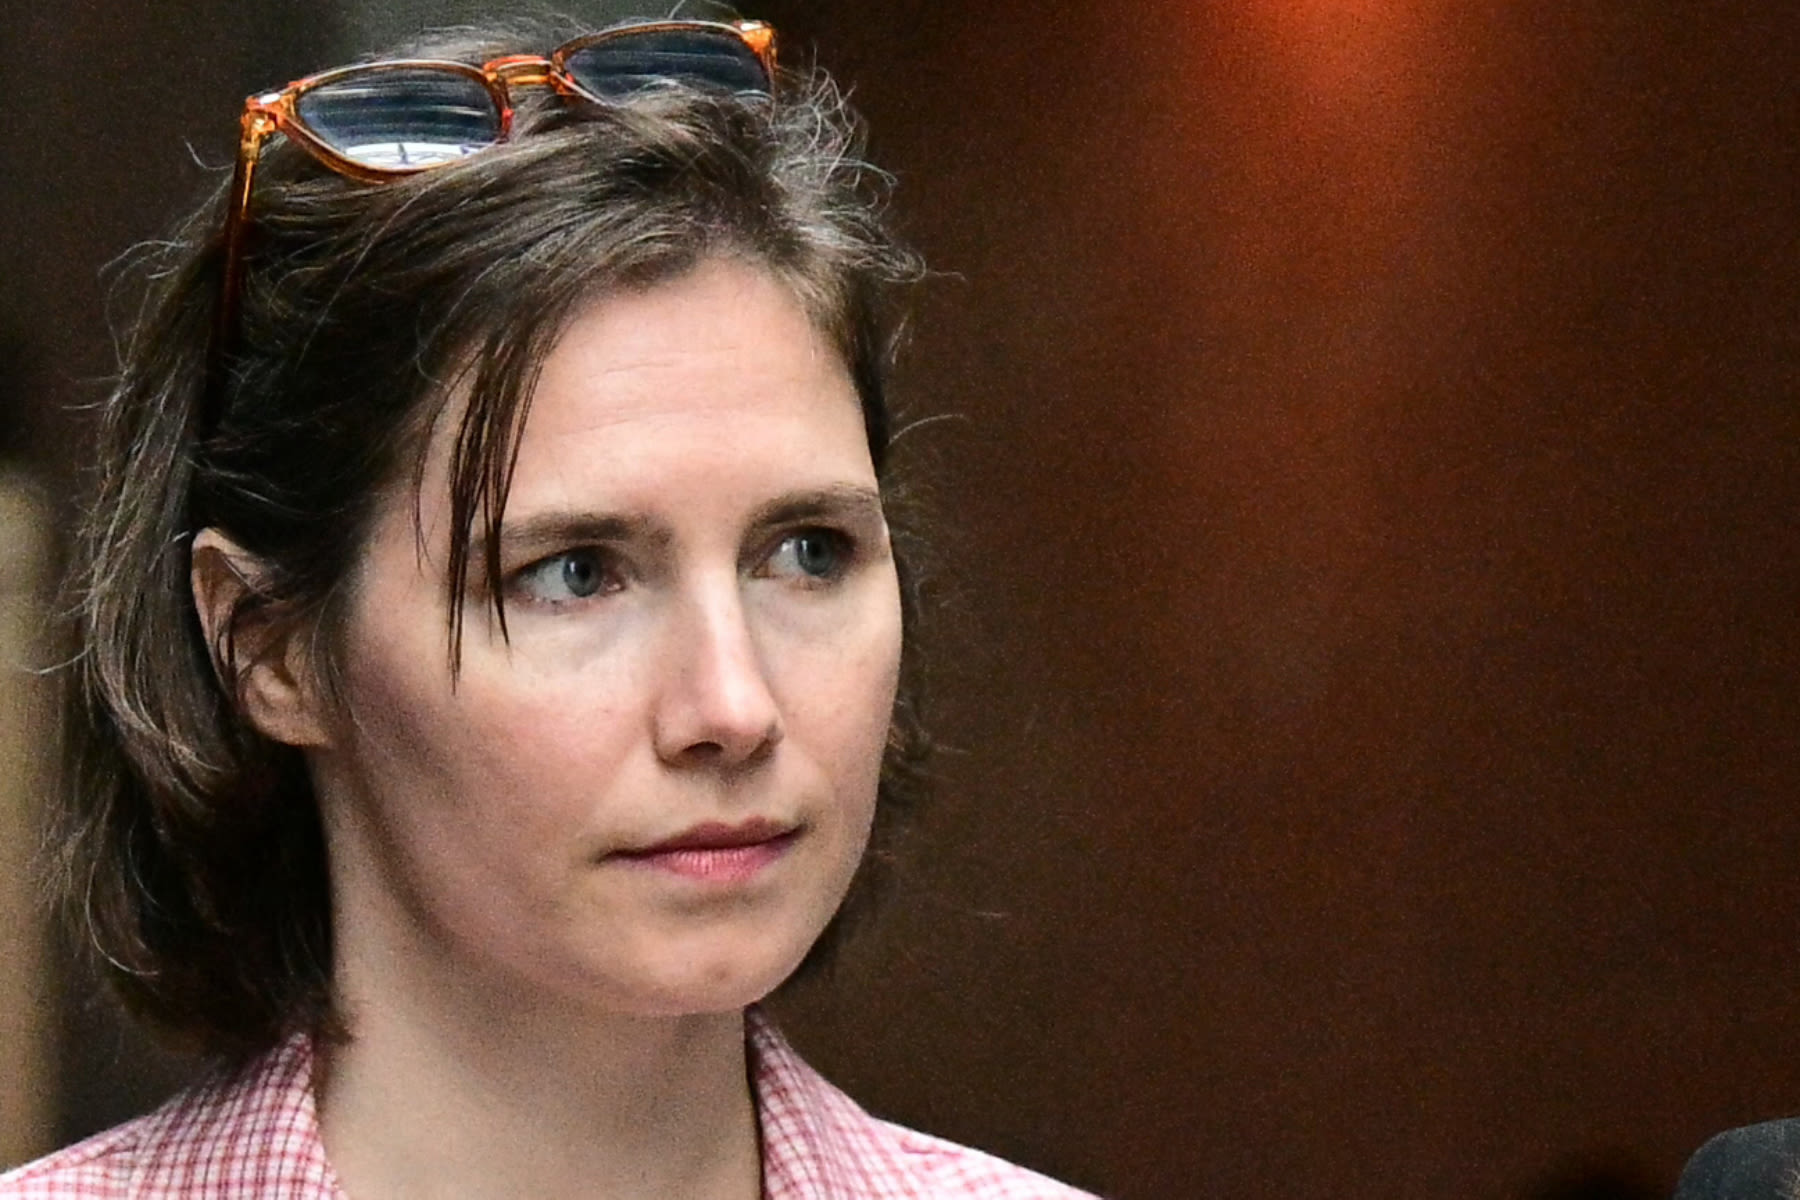 Amanda Knox Plans to Appeal ‘Unfair’ Slander Re-Conviction: ‘I Will Fight for the Truth’